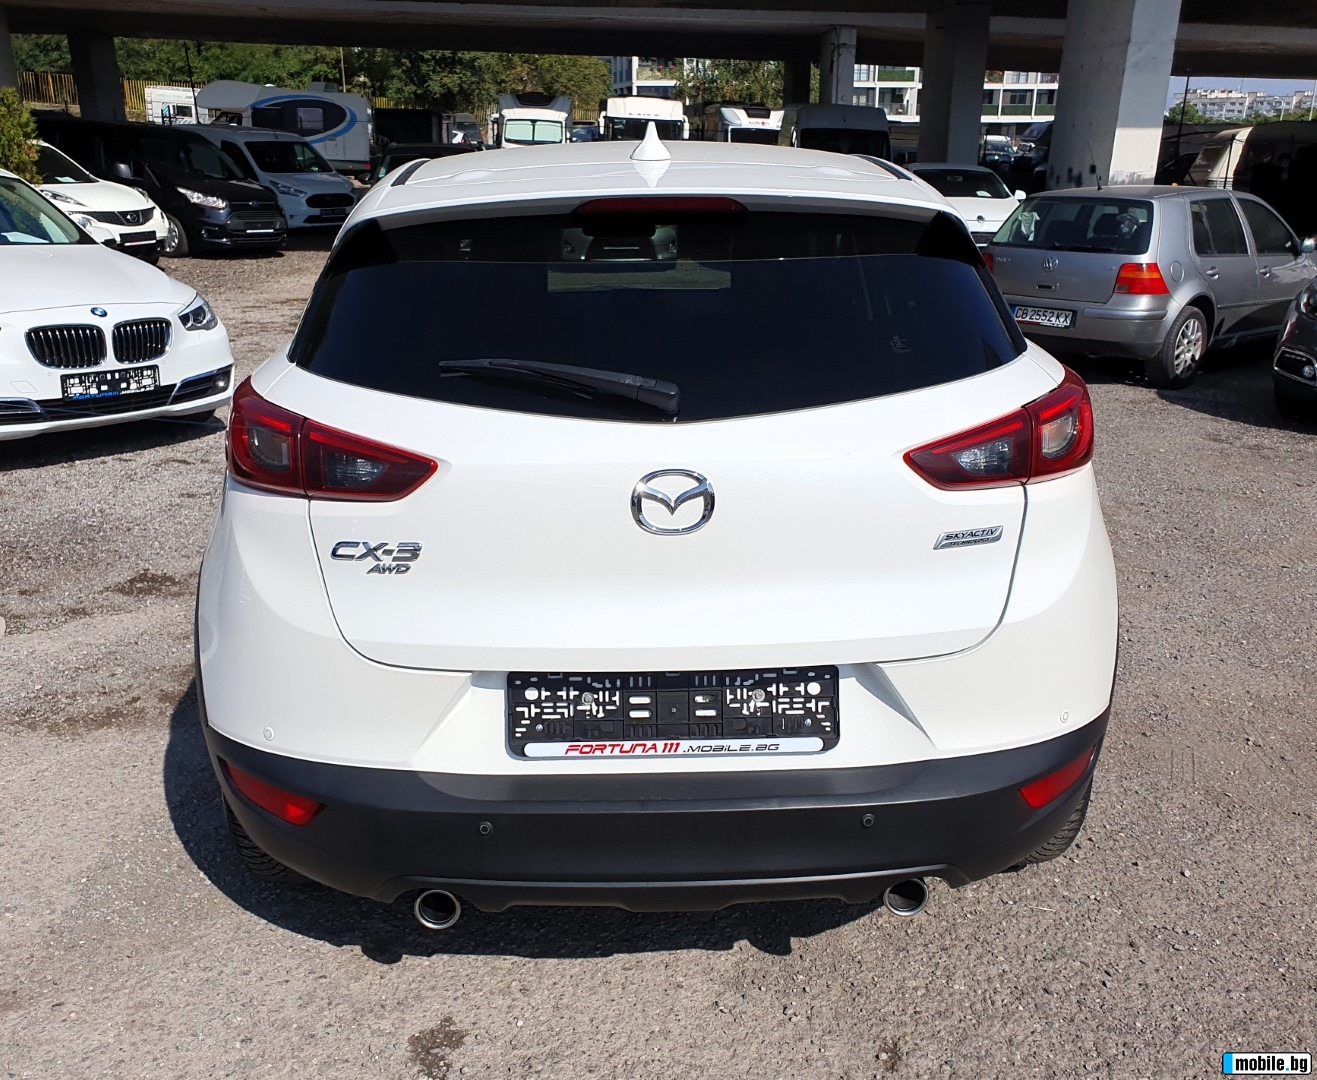 Mazda -3 AWD Exceed 1.5d | Mobile.bg   5